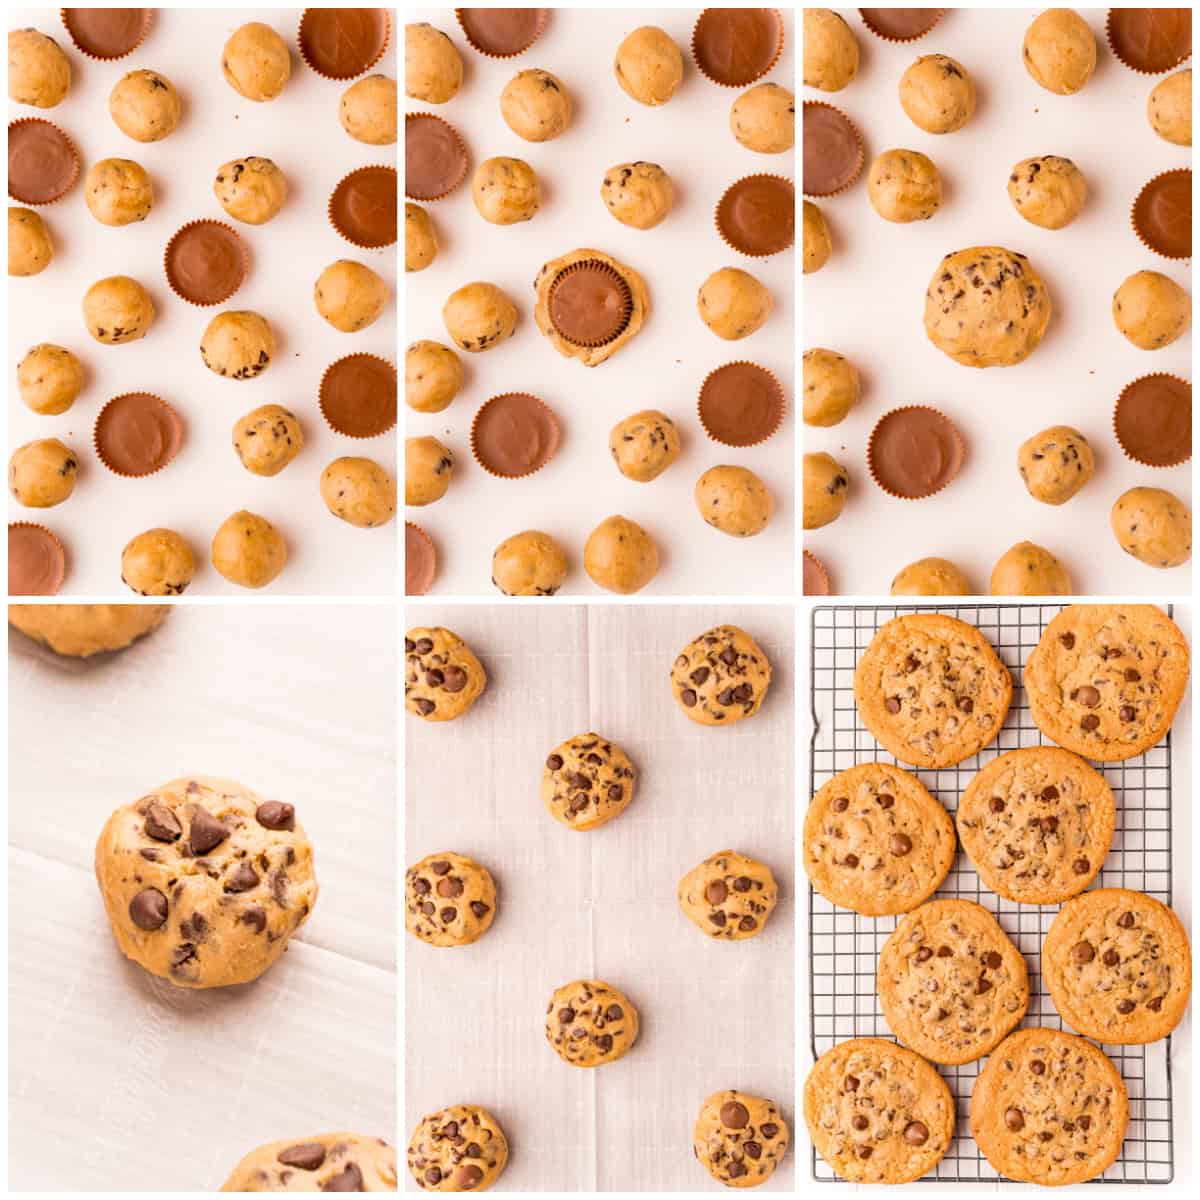 Step by step photos on how to make Reese's Stuffed Cookies.